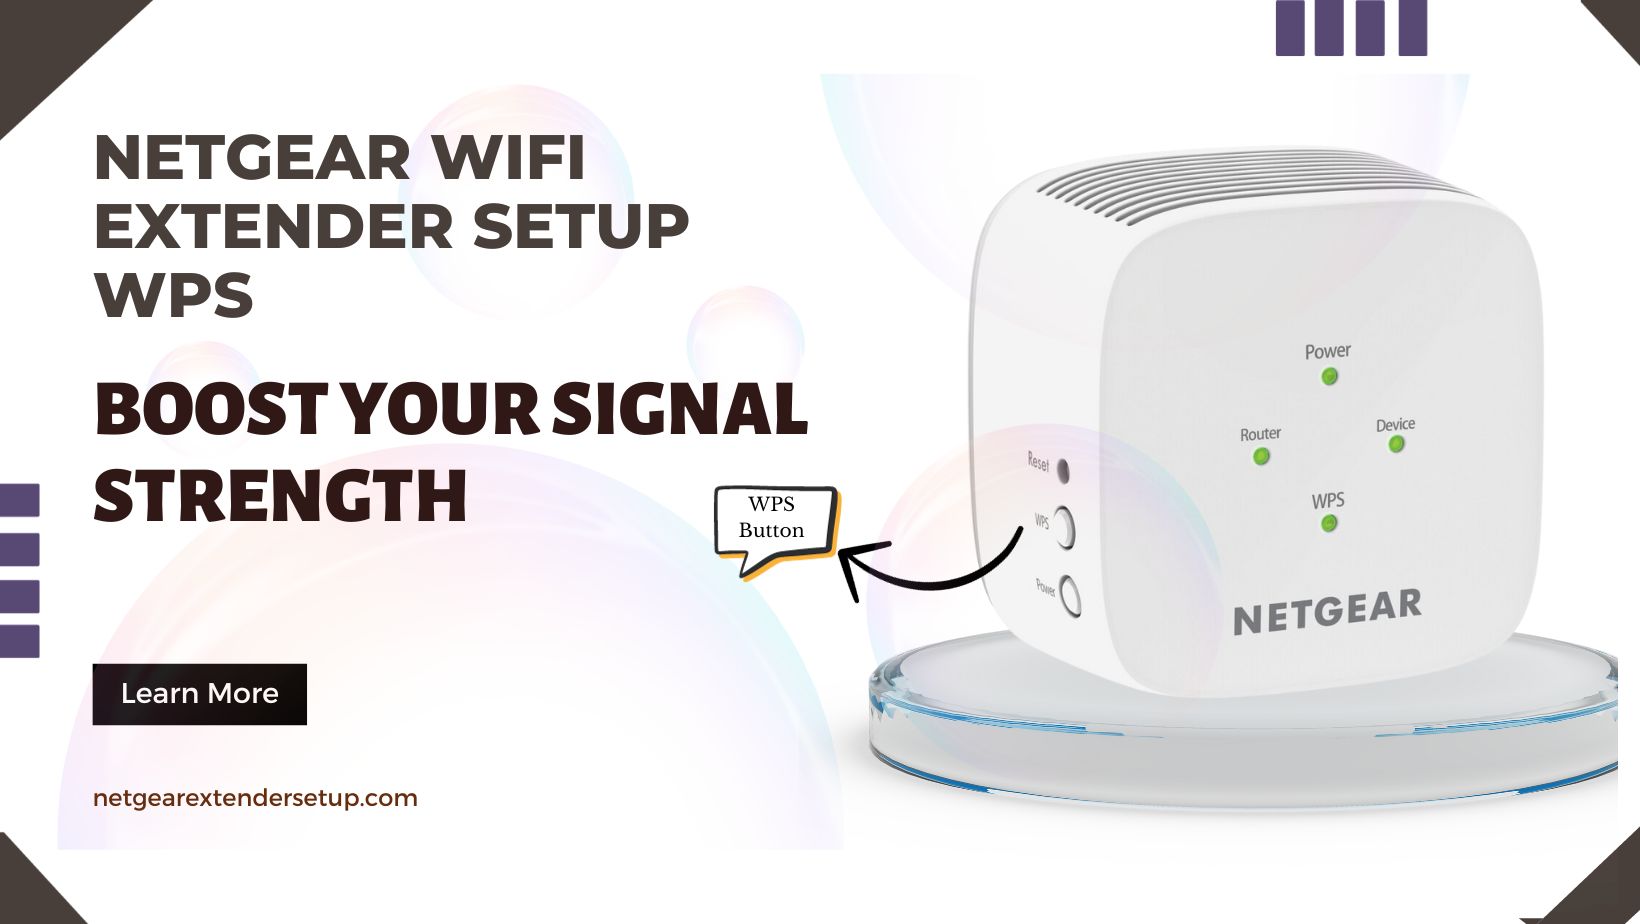 You are currently viewing Netgear WiFi Extender Setup WPS: Boost Your Signal Strength